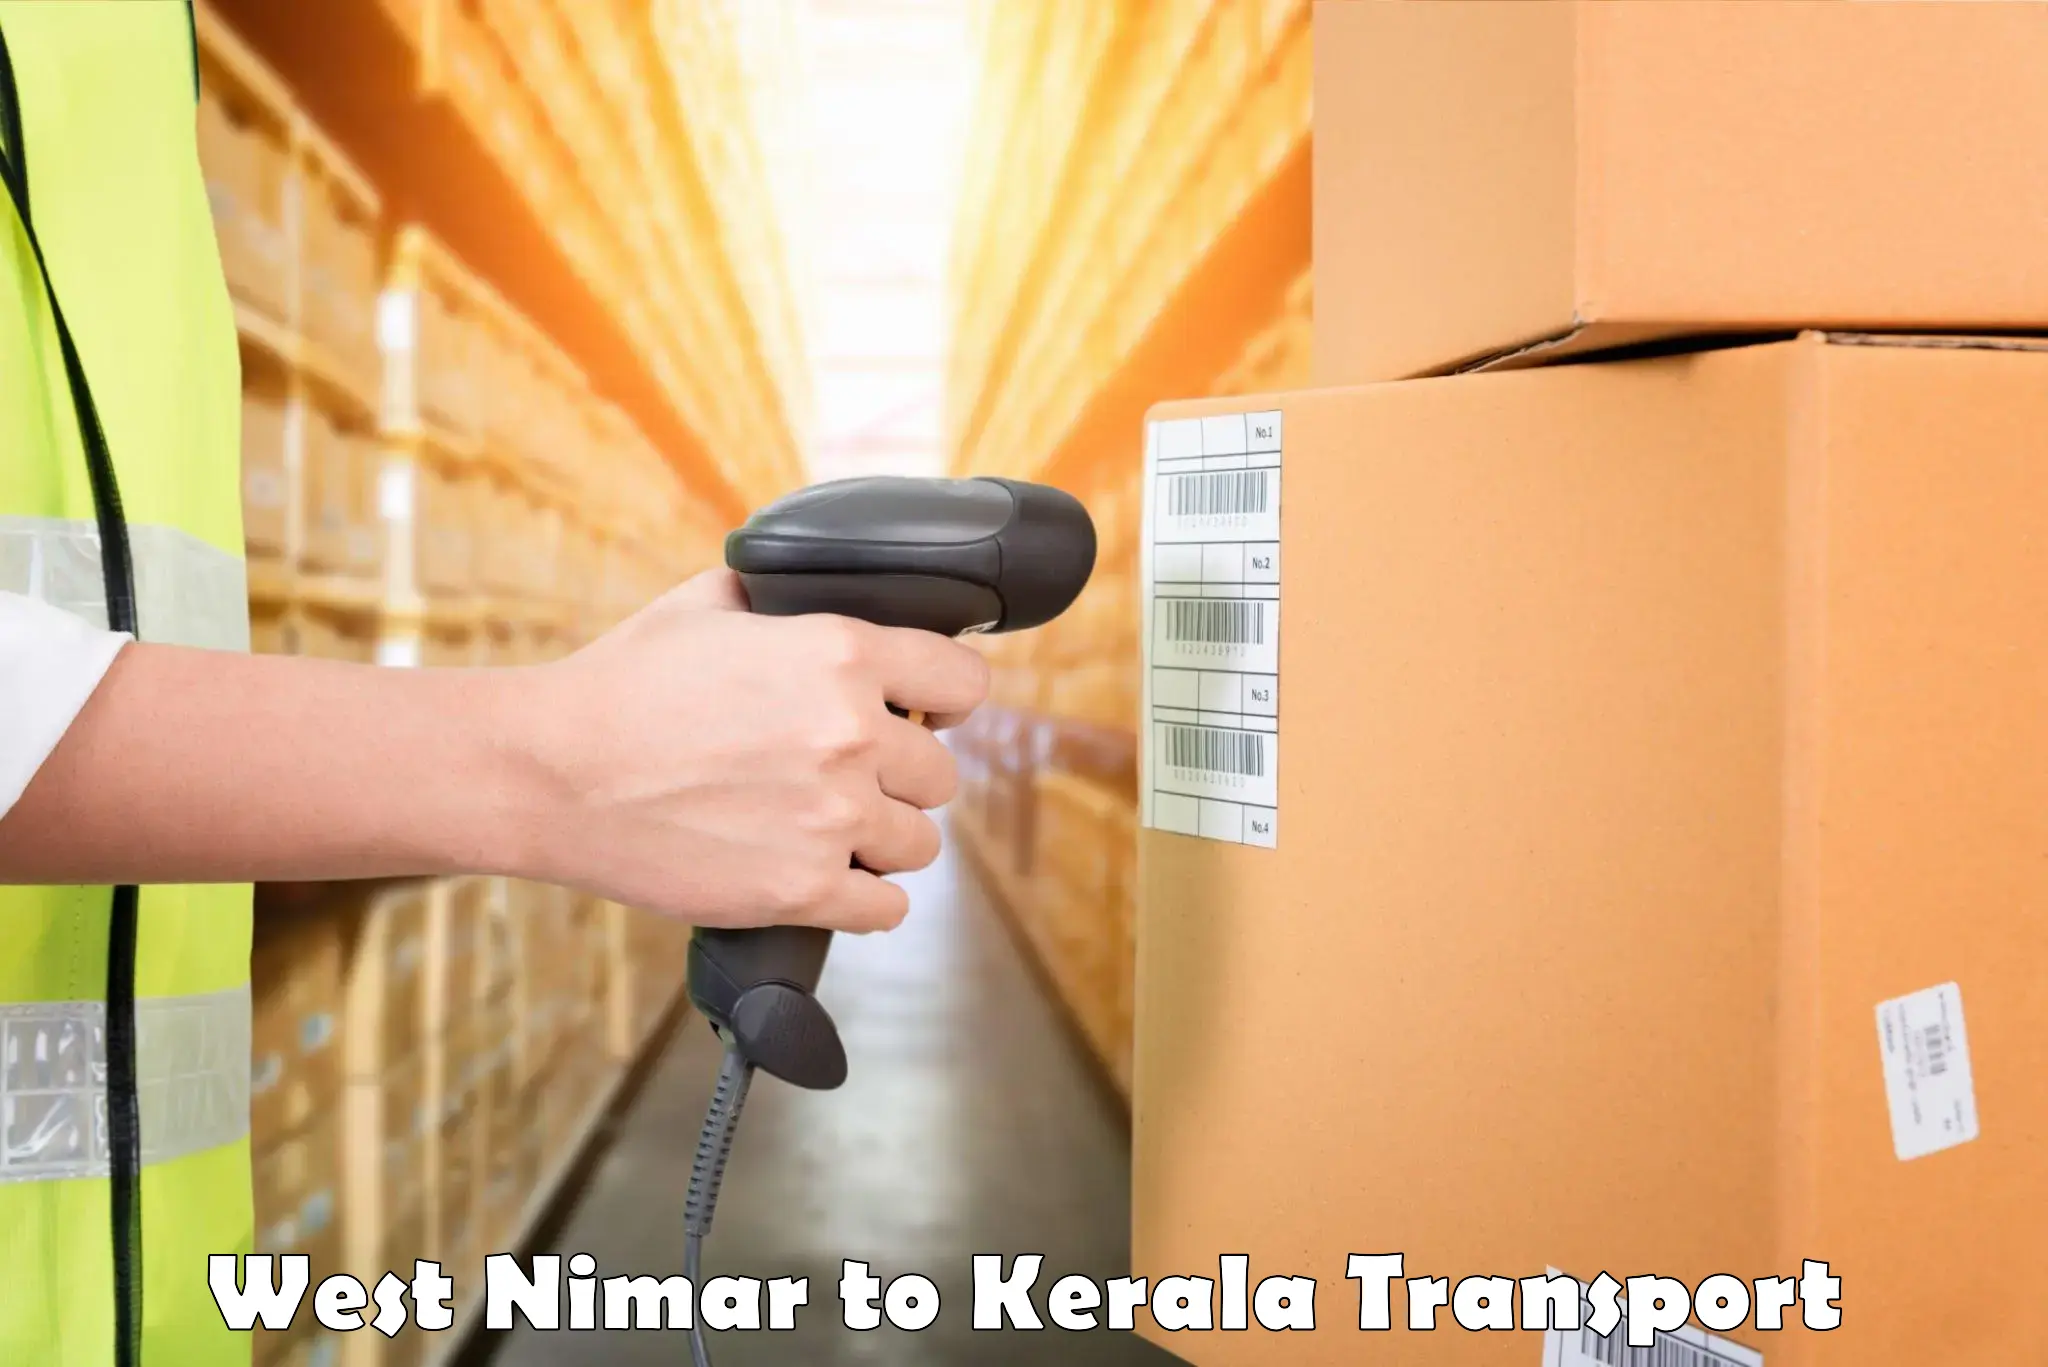 Container transport service in West Nimar to Palakkad